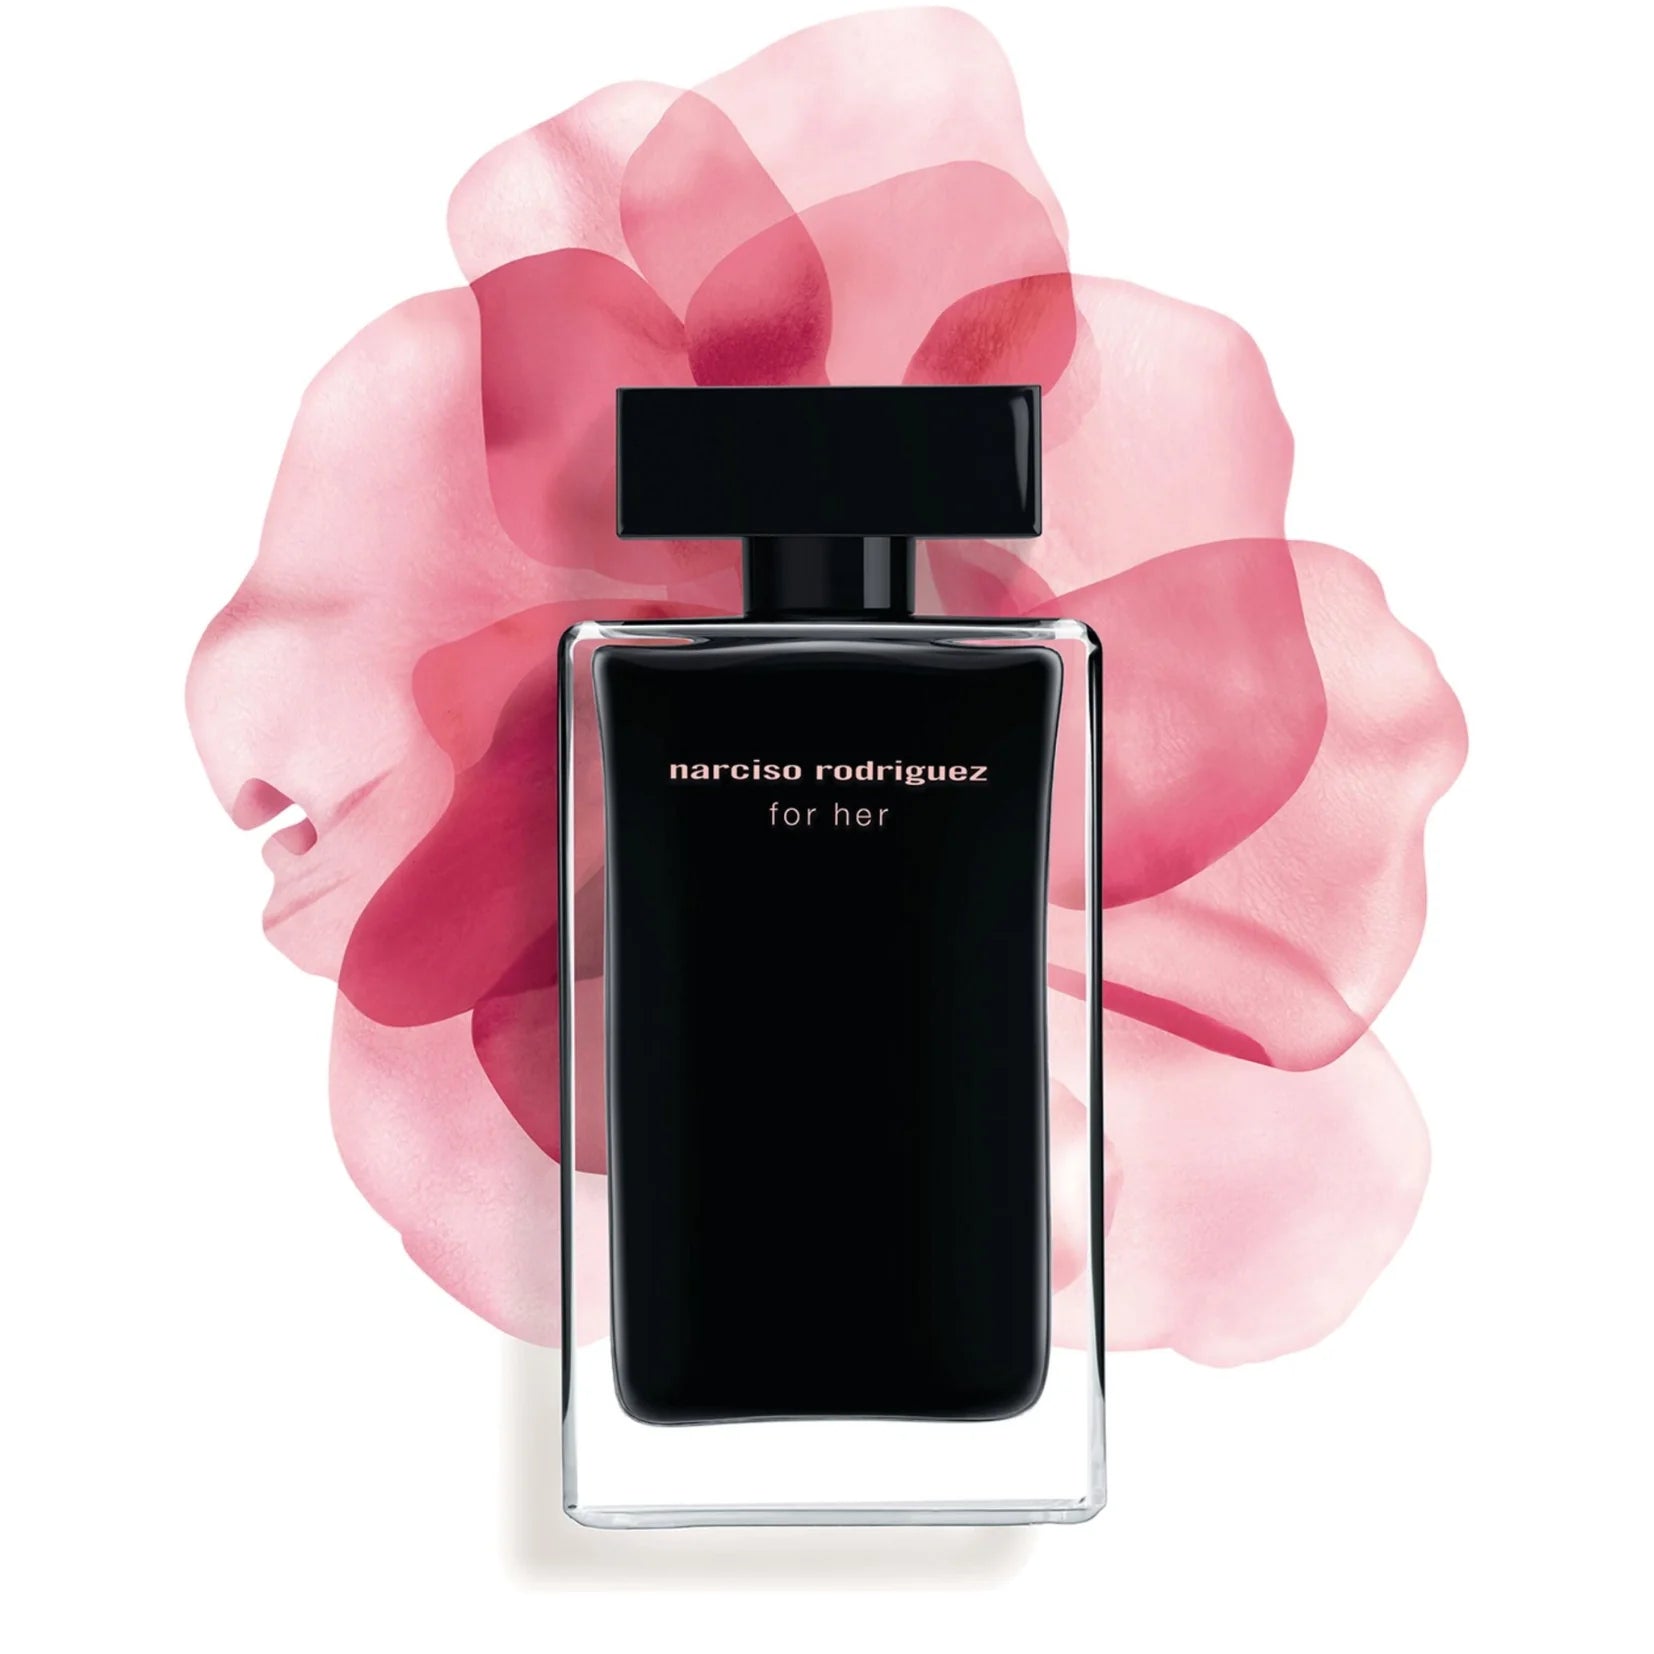 Narciso Rodriguez For Her EDT & Pure Musc Duo Set | My Perfume Shop Australia